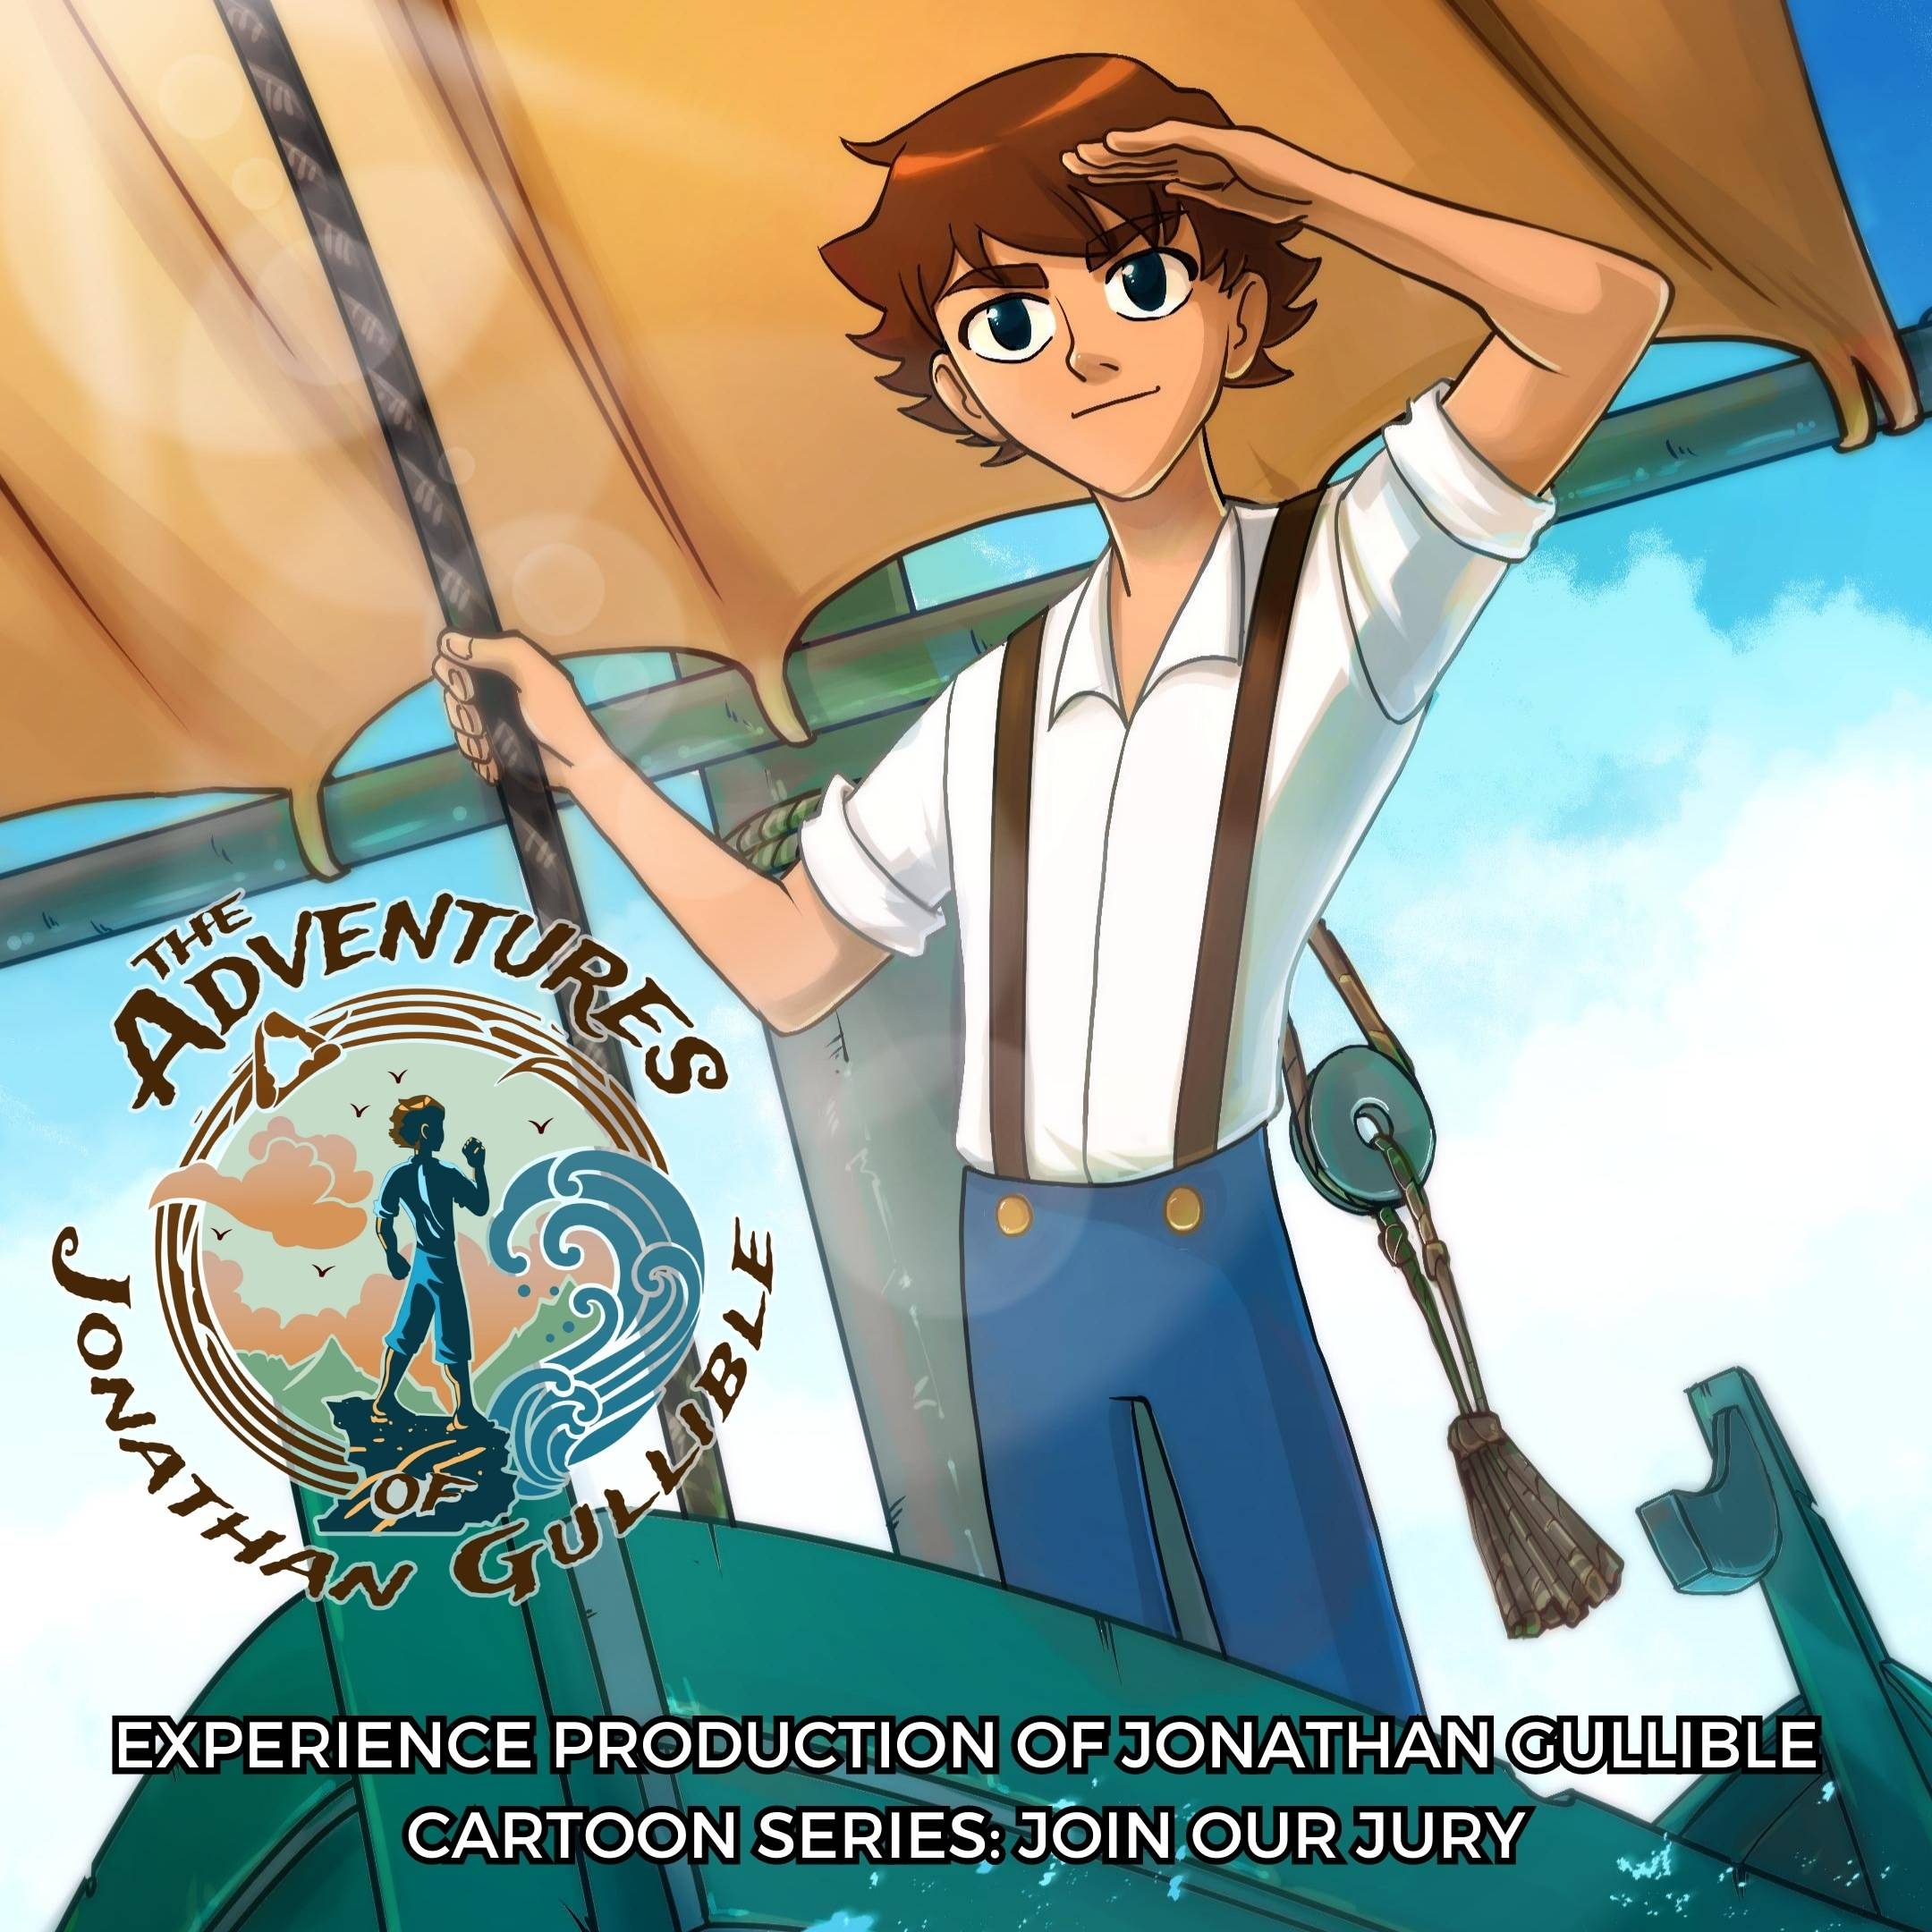 Experience Production of Jonathan Gullible Cartoon Series: Join Our Jury